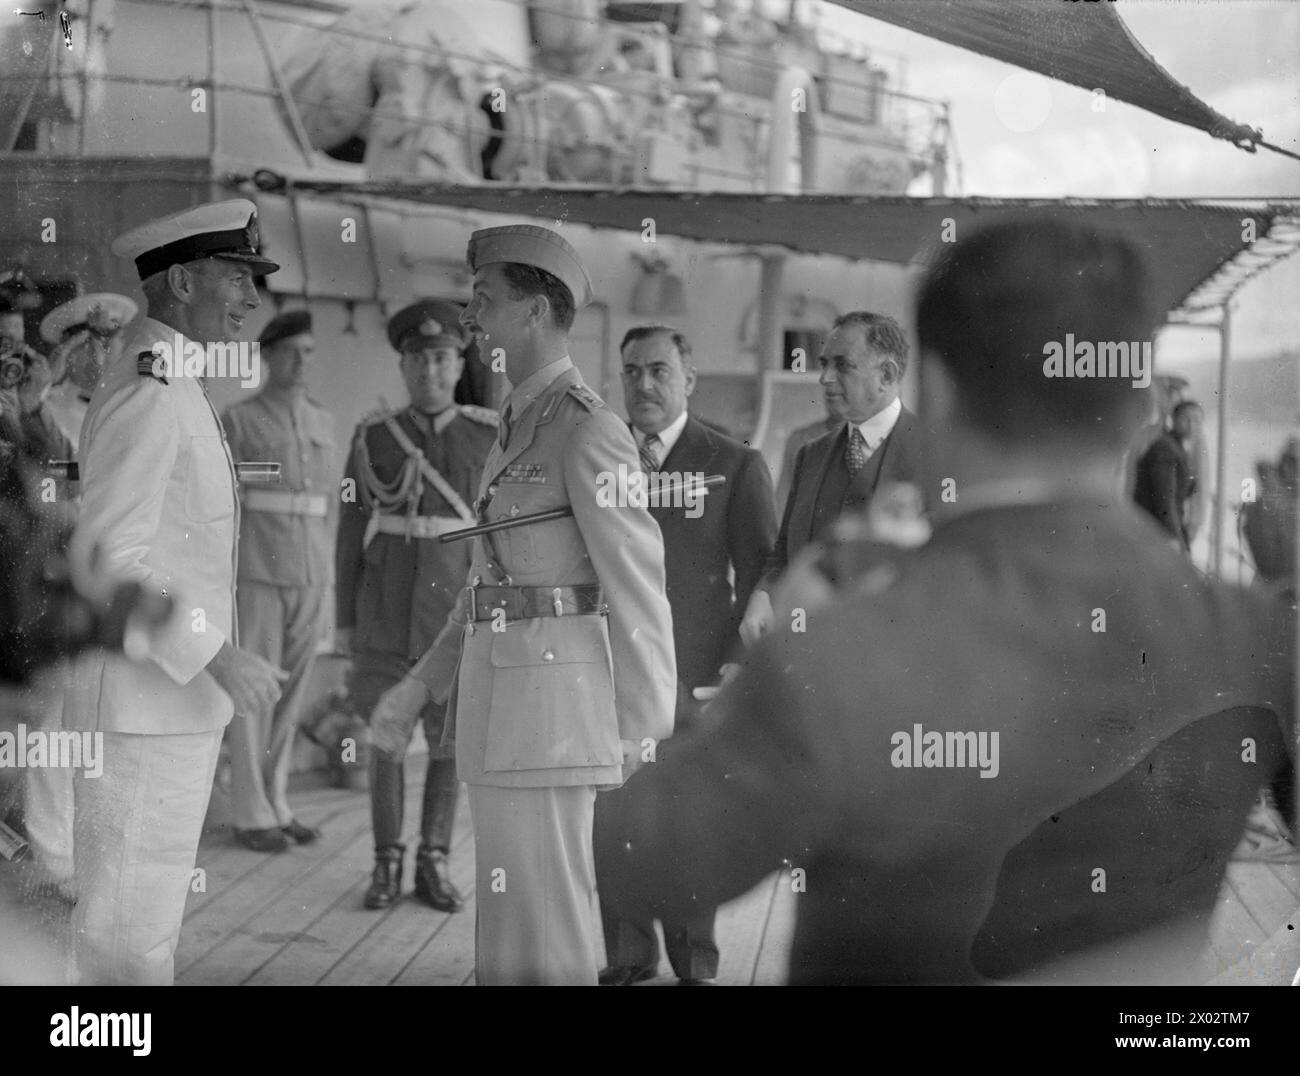 THE BRITISH CRUISER HMS AJAX VISITS TURKEY. 15 TO 18 SEPTEMBER 1945, ON BOARD HMS AJAX, AND ASHORE AT ISTANBUL. DURING THE VISIT OF HMS AJAX AND THE DESTROYERS HMS MARNE AND HMS METEOR TO ISTANBUL. ON BOARD THE CRUISER WAS HRH EMIR ABDUL ILLAH, REGENT OF IRAQ, AND HIS STAFF. ON 16 SEPTEMBER 1945 CAPTAIN J CUTHBERT, RN, OF THE AJAX LAID A WREATH ON THE TURKISH INDEPENDENCE MEMORIAL IN TAKSIM SQUARE, ISTANBUL, AND THE NEXT DAY THE CRUISER WAS OPEN TO VISITORS. - The Regent of Iraq, HRH Emir Abdul Illah, taking leave of Captain Cuthbert of the AJAX on proceeding ashore,(GOC Istanbul is in the bac Stock Photo